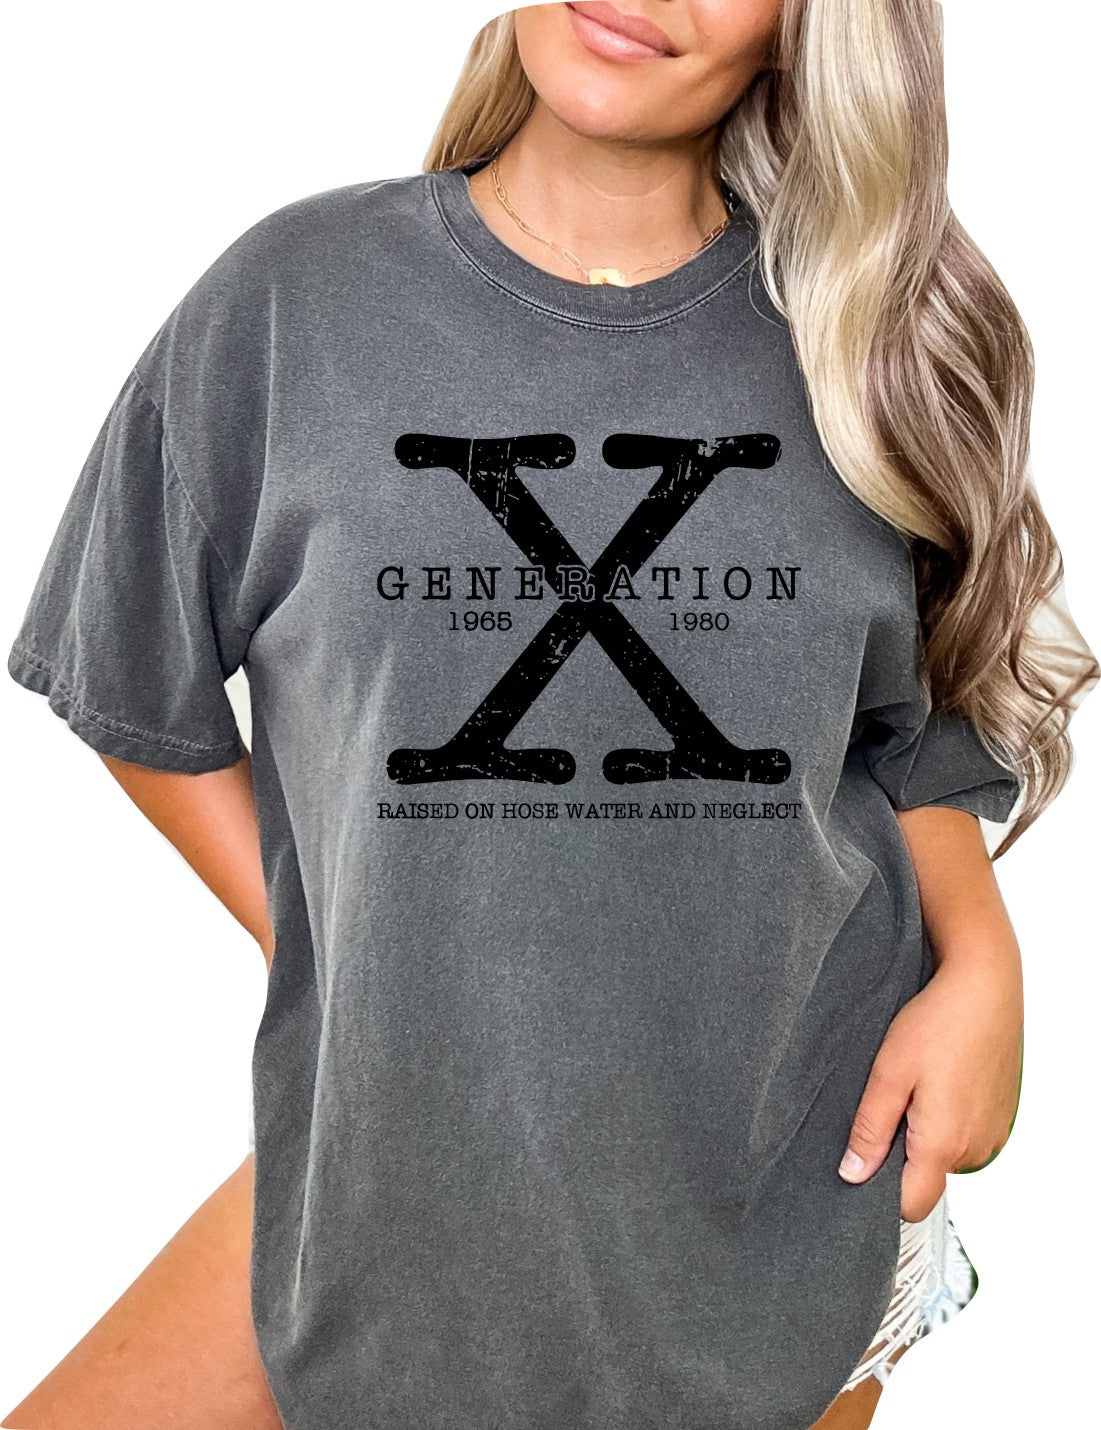 Generation X  Women's T-Shirt Raised on Hose Water and Neglect